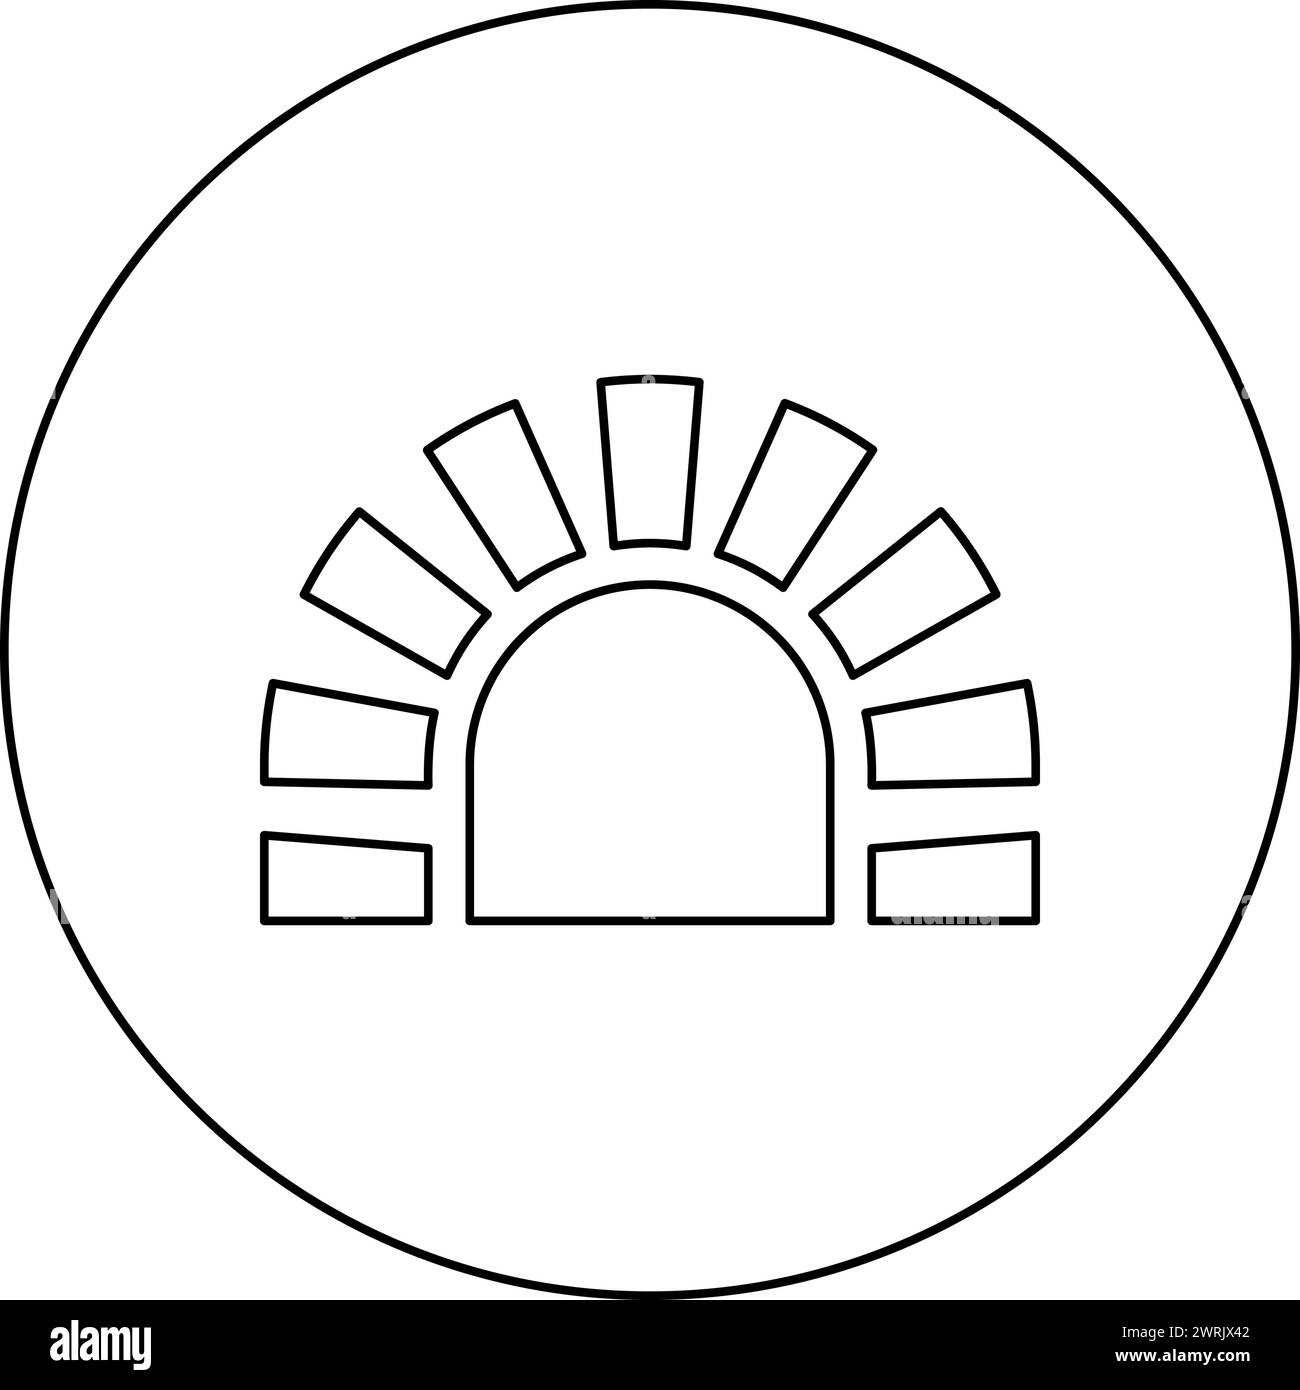 Stone stove brick oven fireplace fireplace for cooking and baking furnace traditional icon in circle round black color vector illustration image Stock Vector